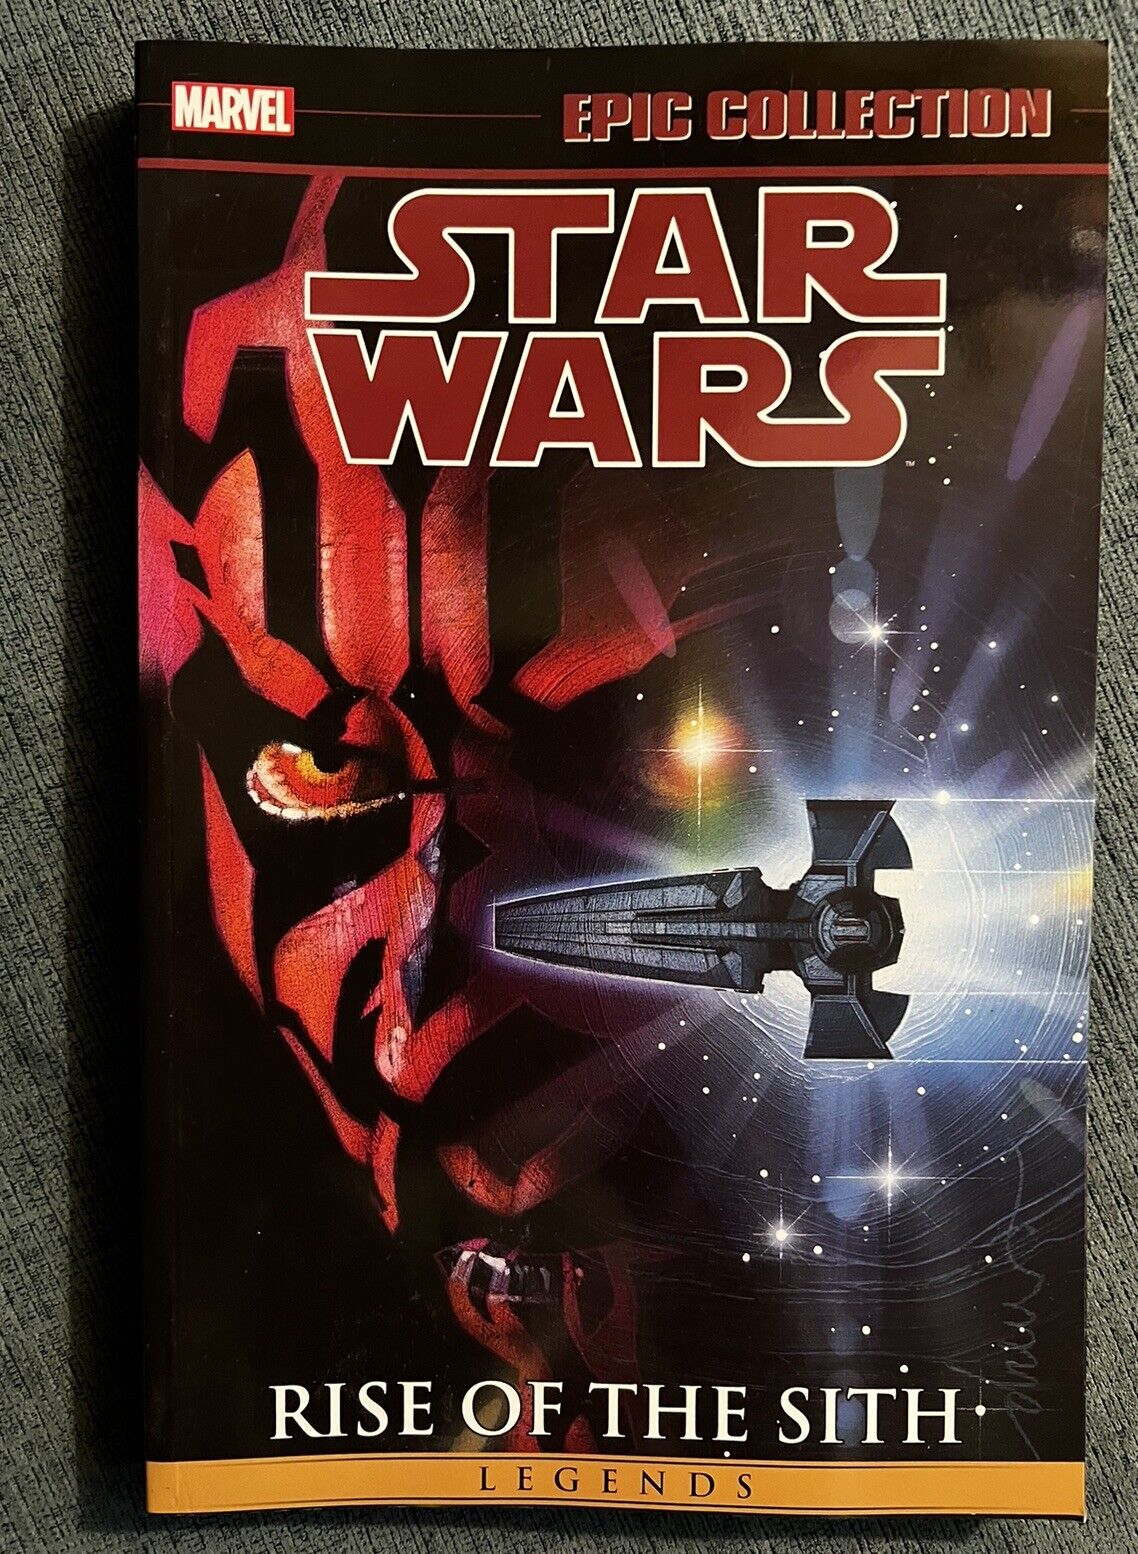 STAR WARS - Legends Epic Coll - Rise Of The Sith - Vol 2 (2017) TPB - OOP - New